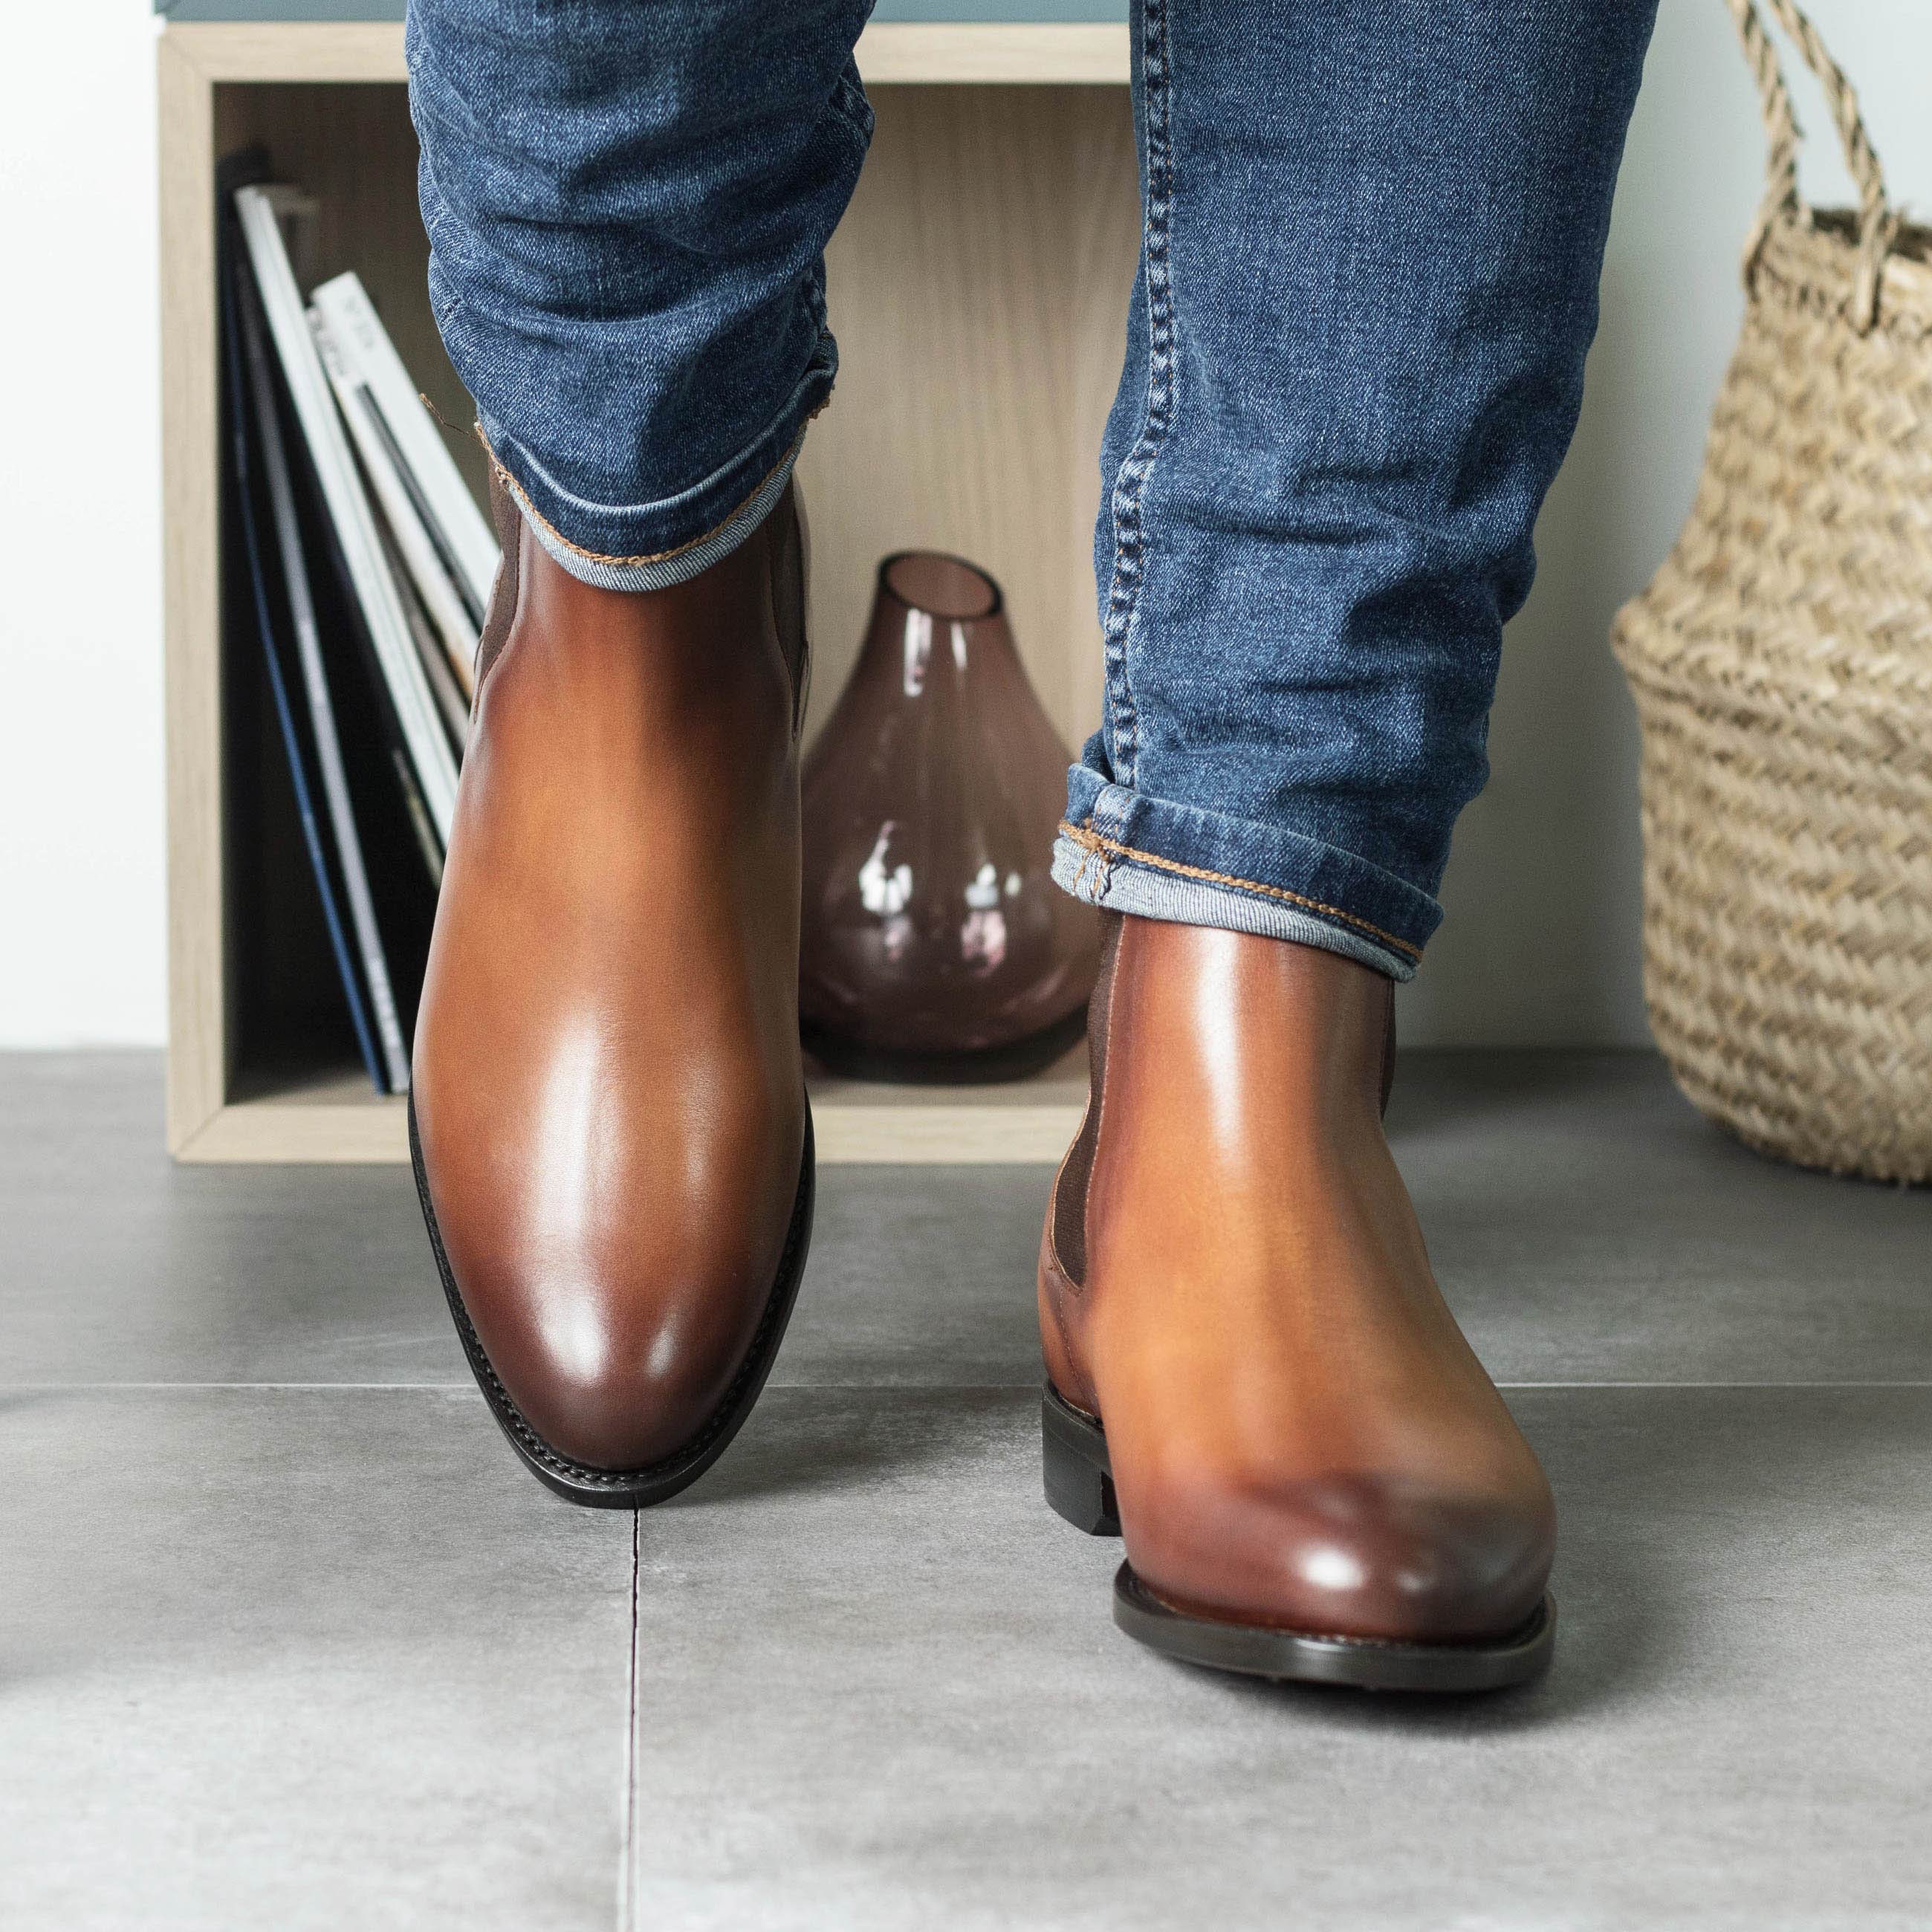 Brown Handmade Chelsea Boot Boots Anti-slip Leather - Etsy